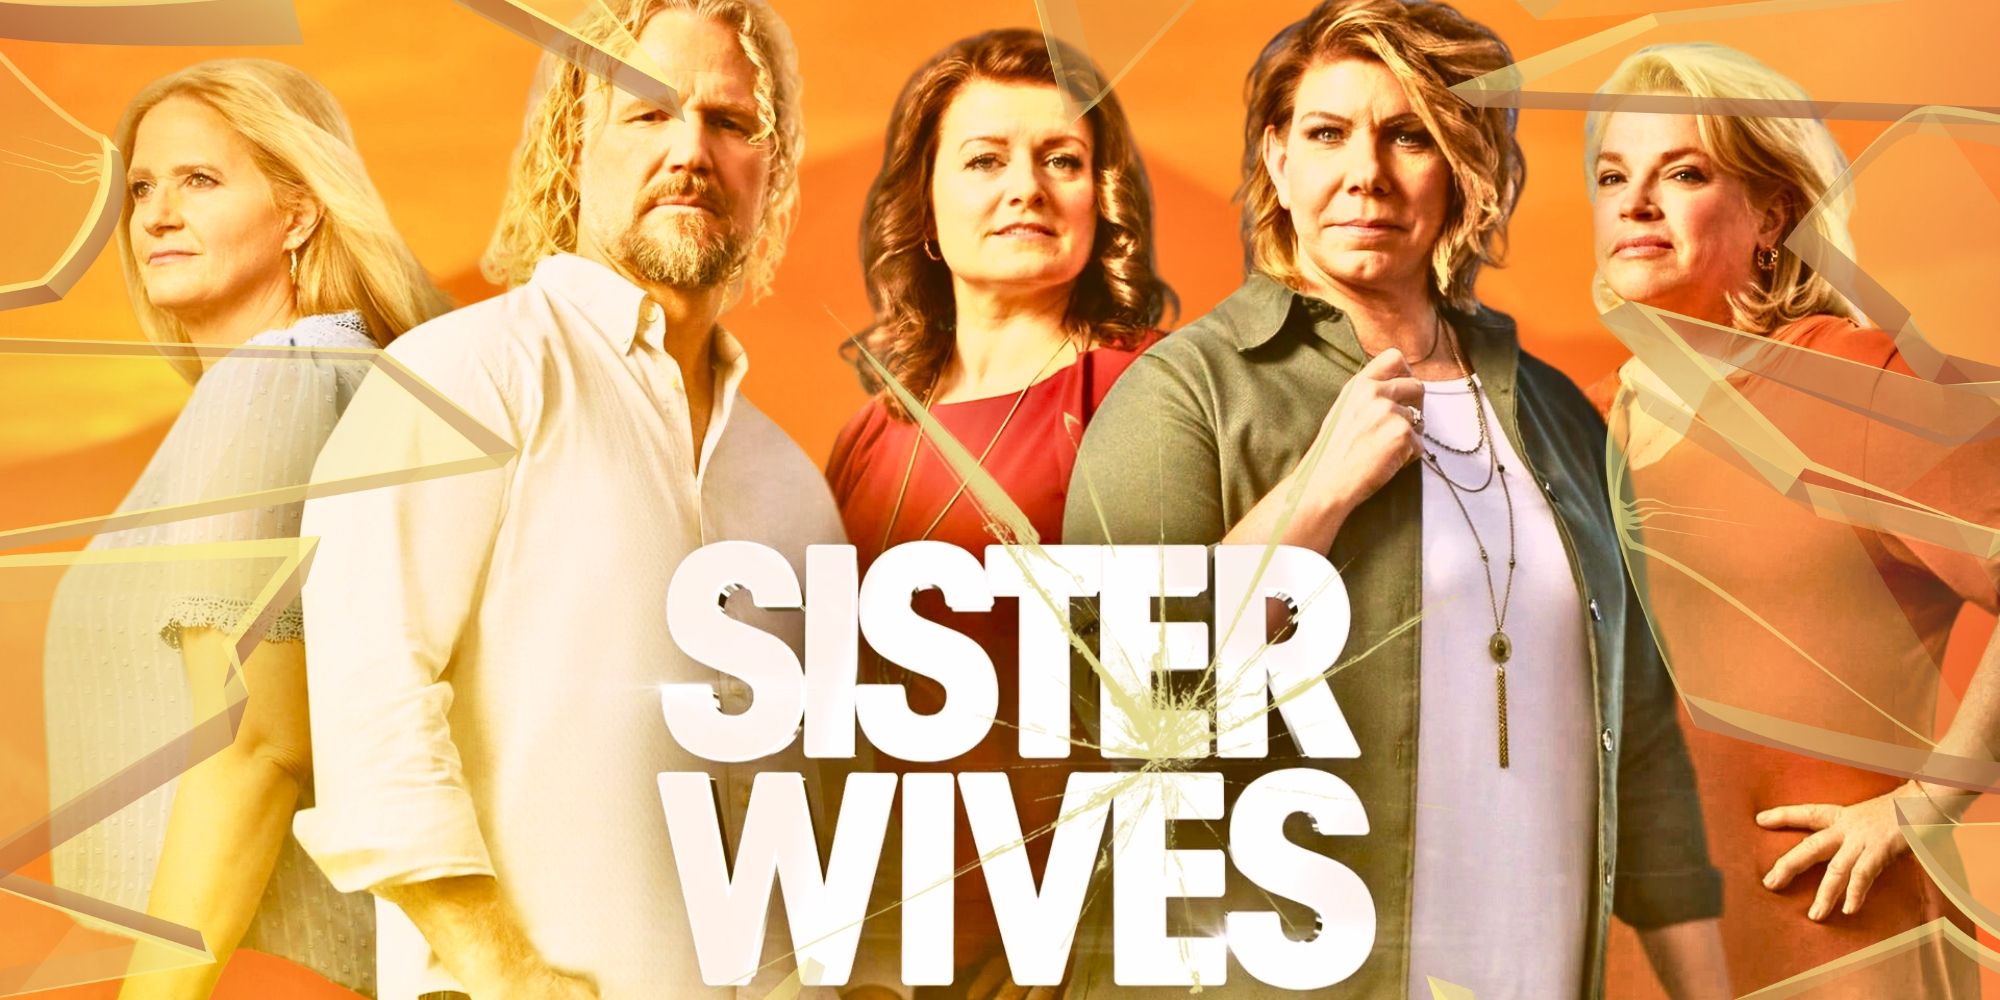 Sister Wives stars Kody, Meri, Robyn, Janelle, and Christine Brown in promo shot with logo